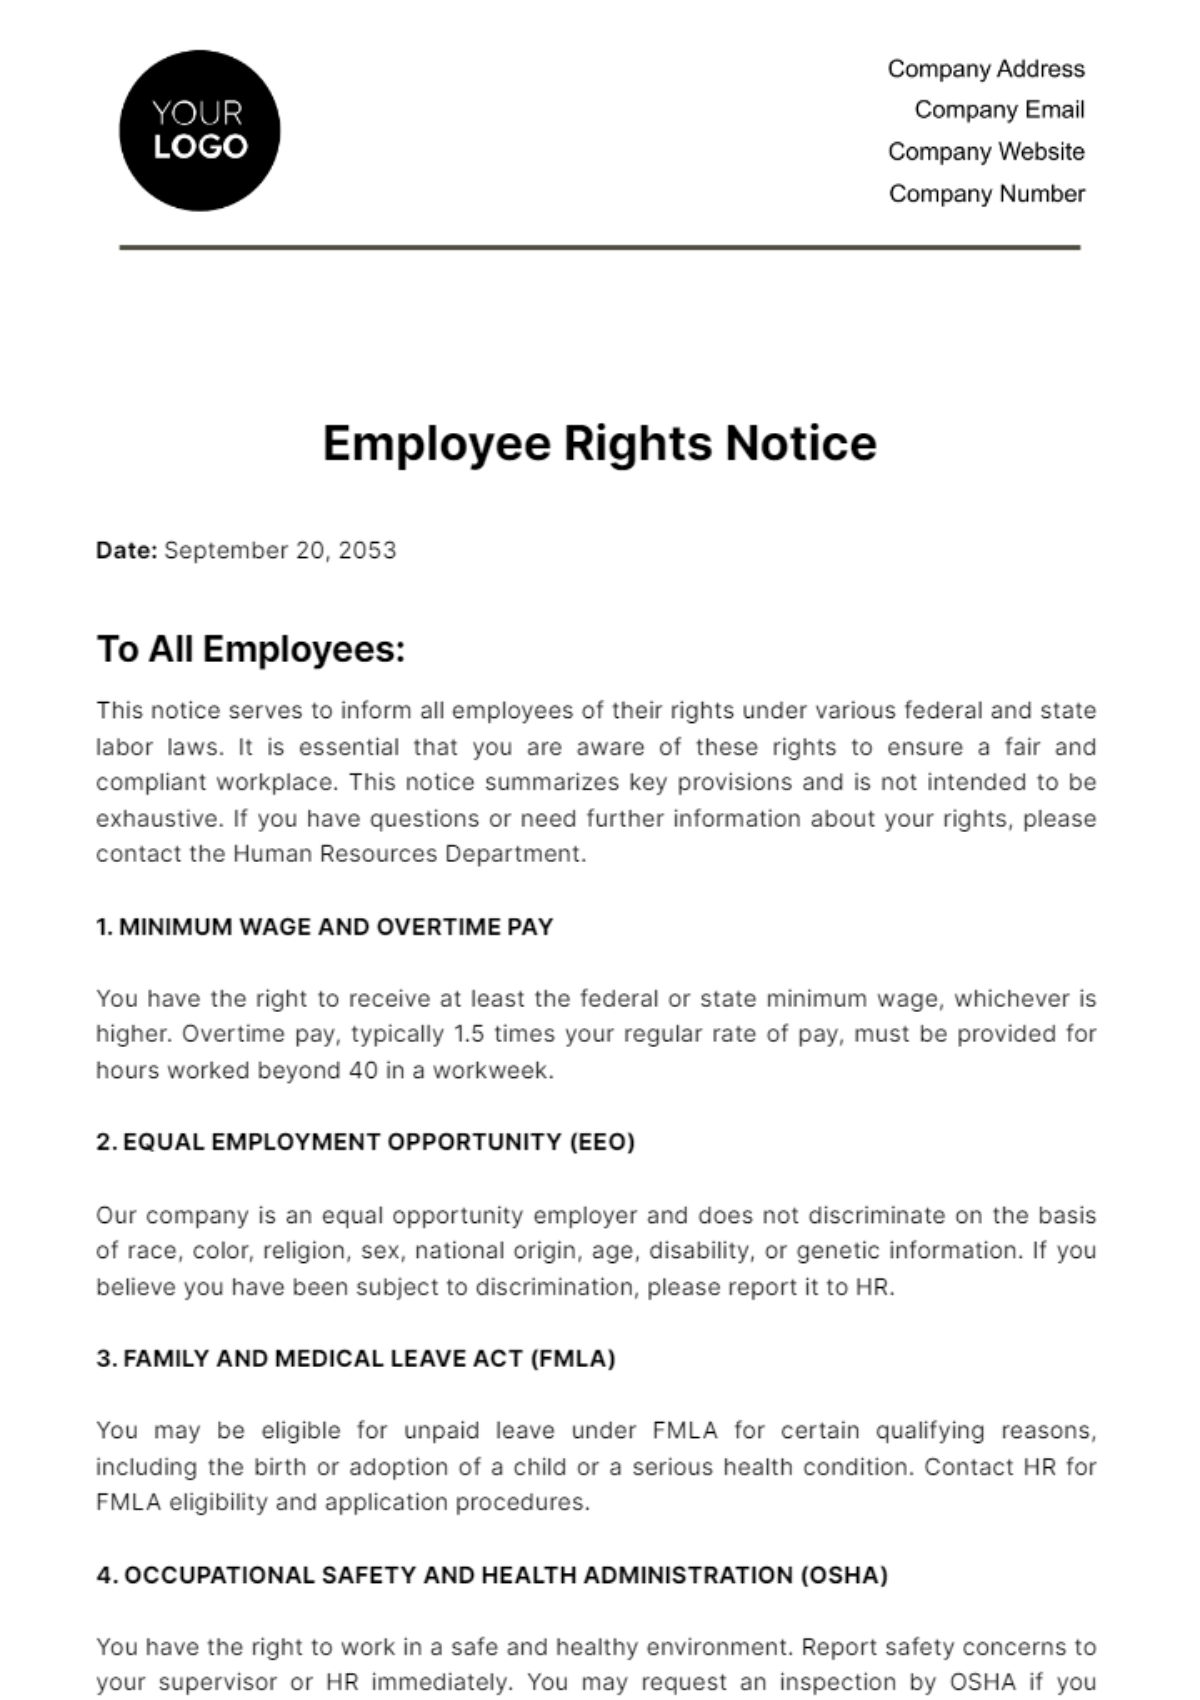 Free Employee Rights Notice HR Template